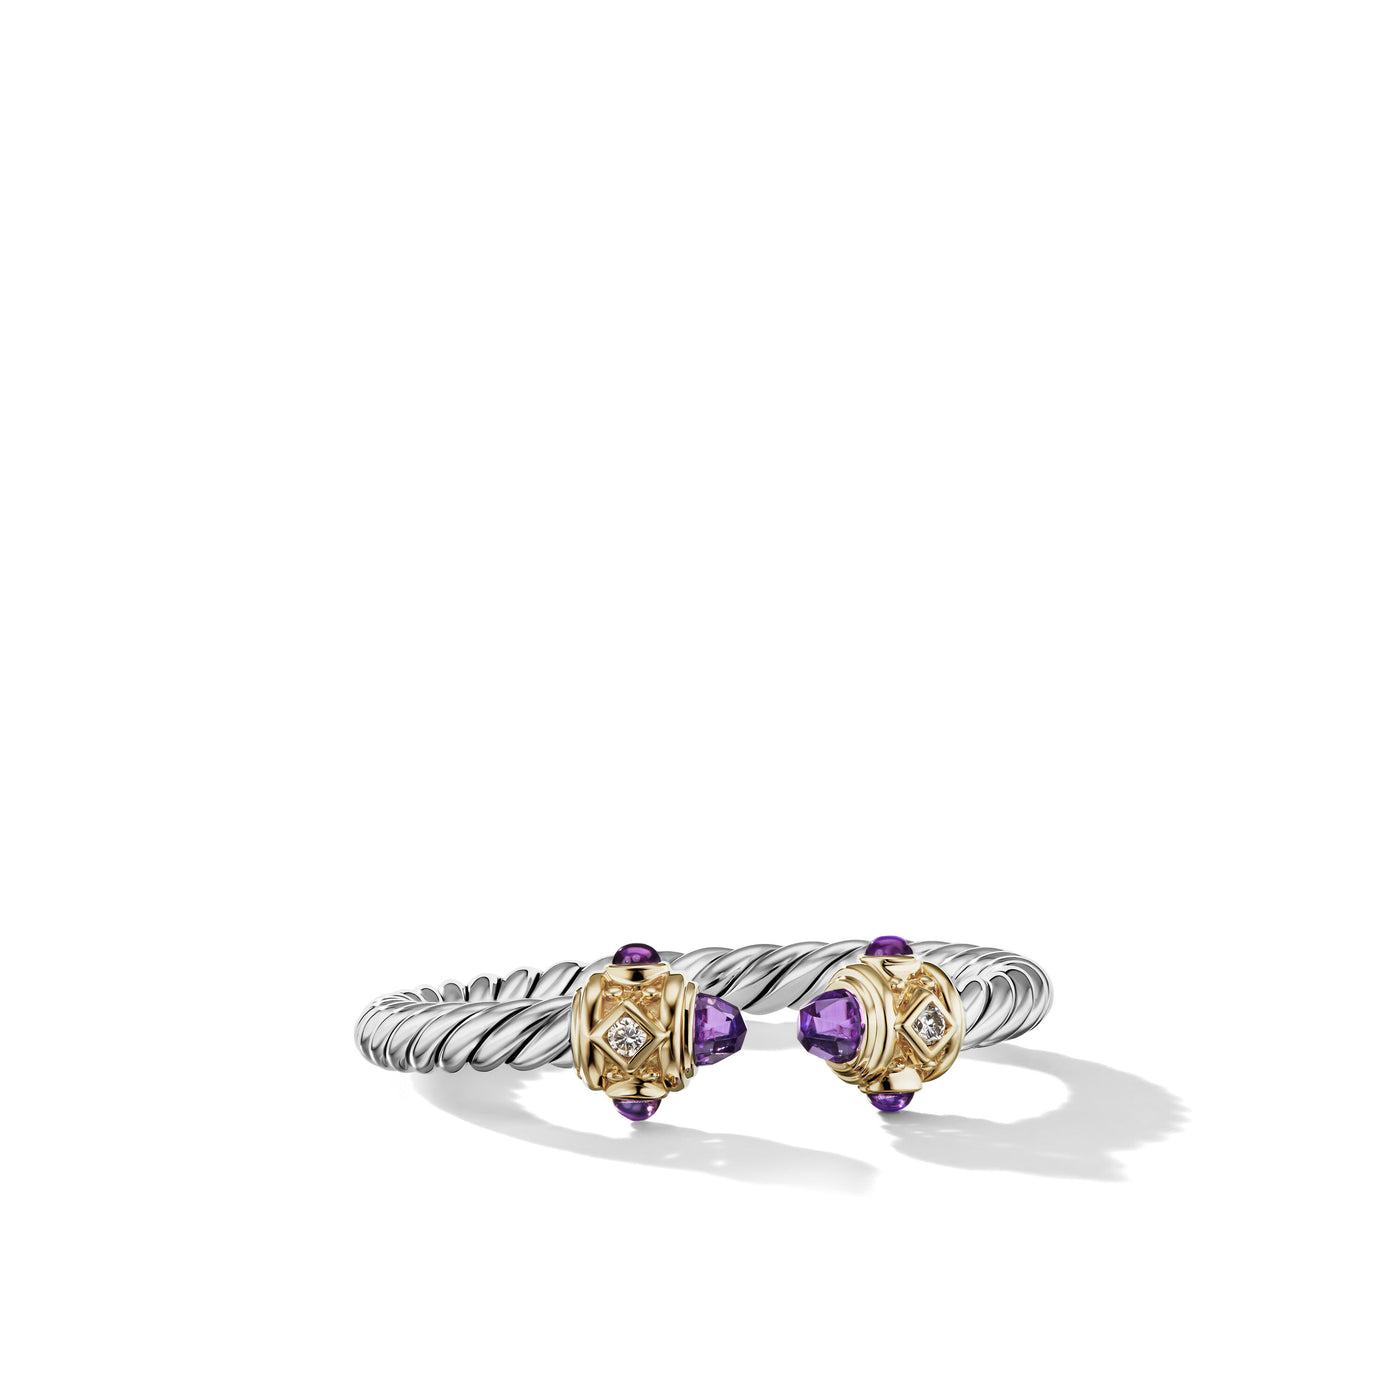 Renaissance Ring in Sterling Silver with 14K Yellow Gold\, Amethyst and Diamonds\, 2.3mm